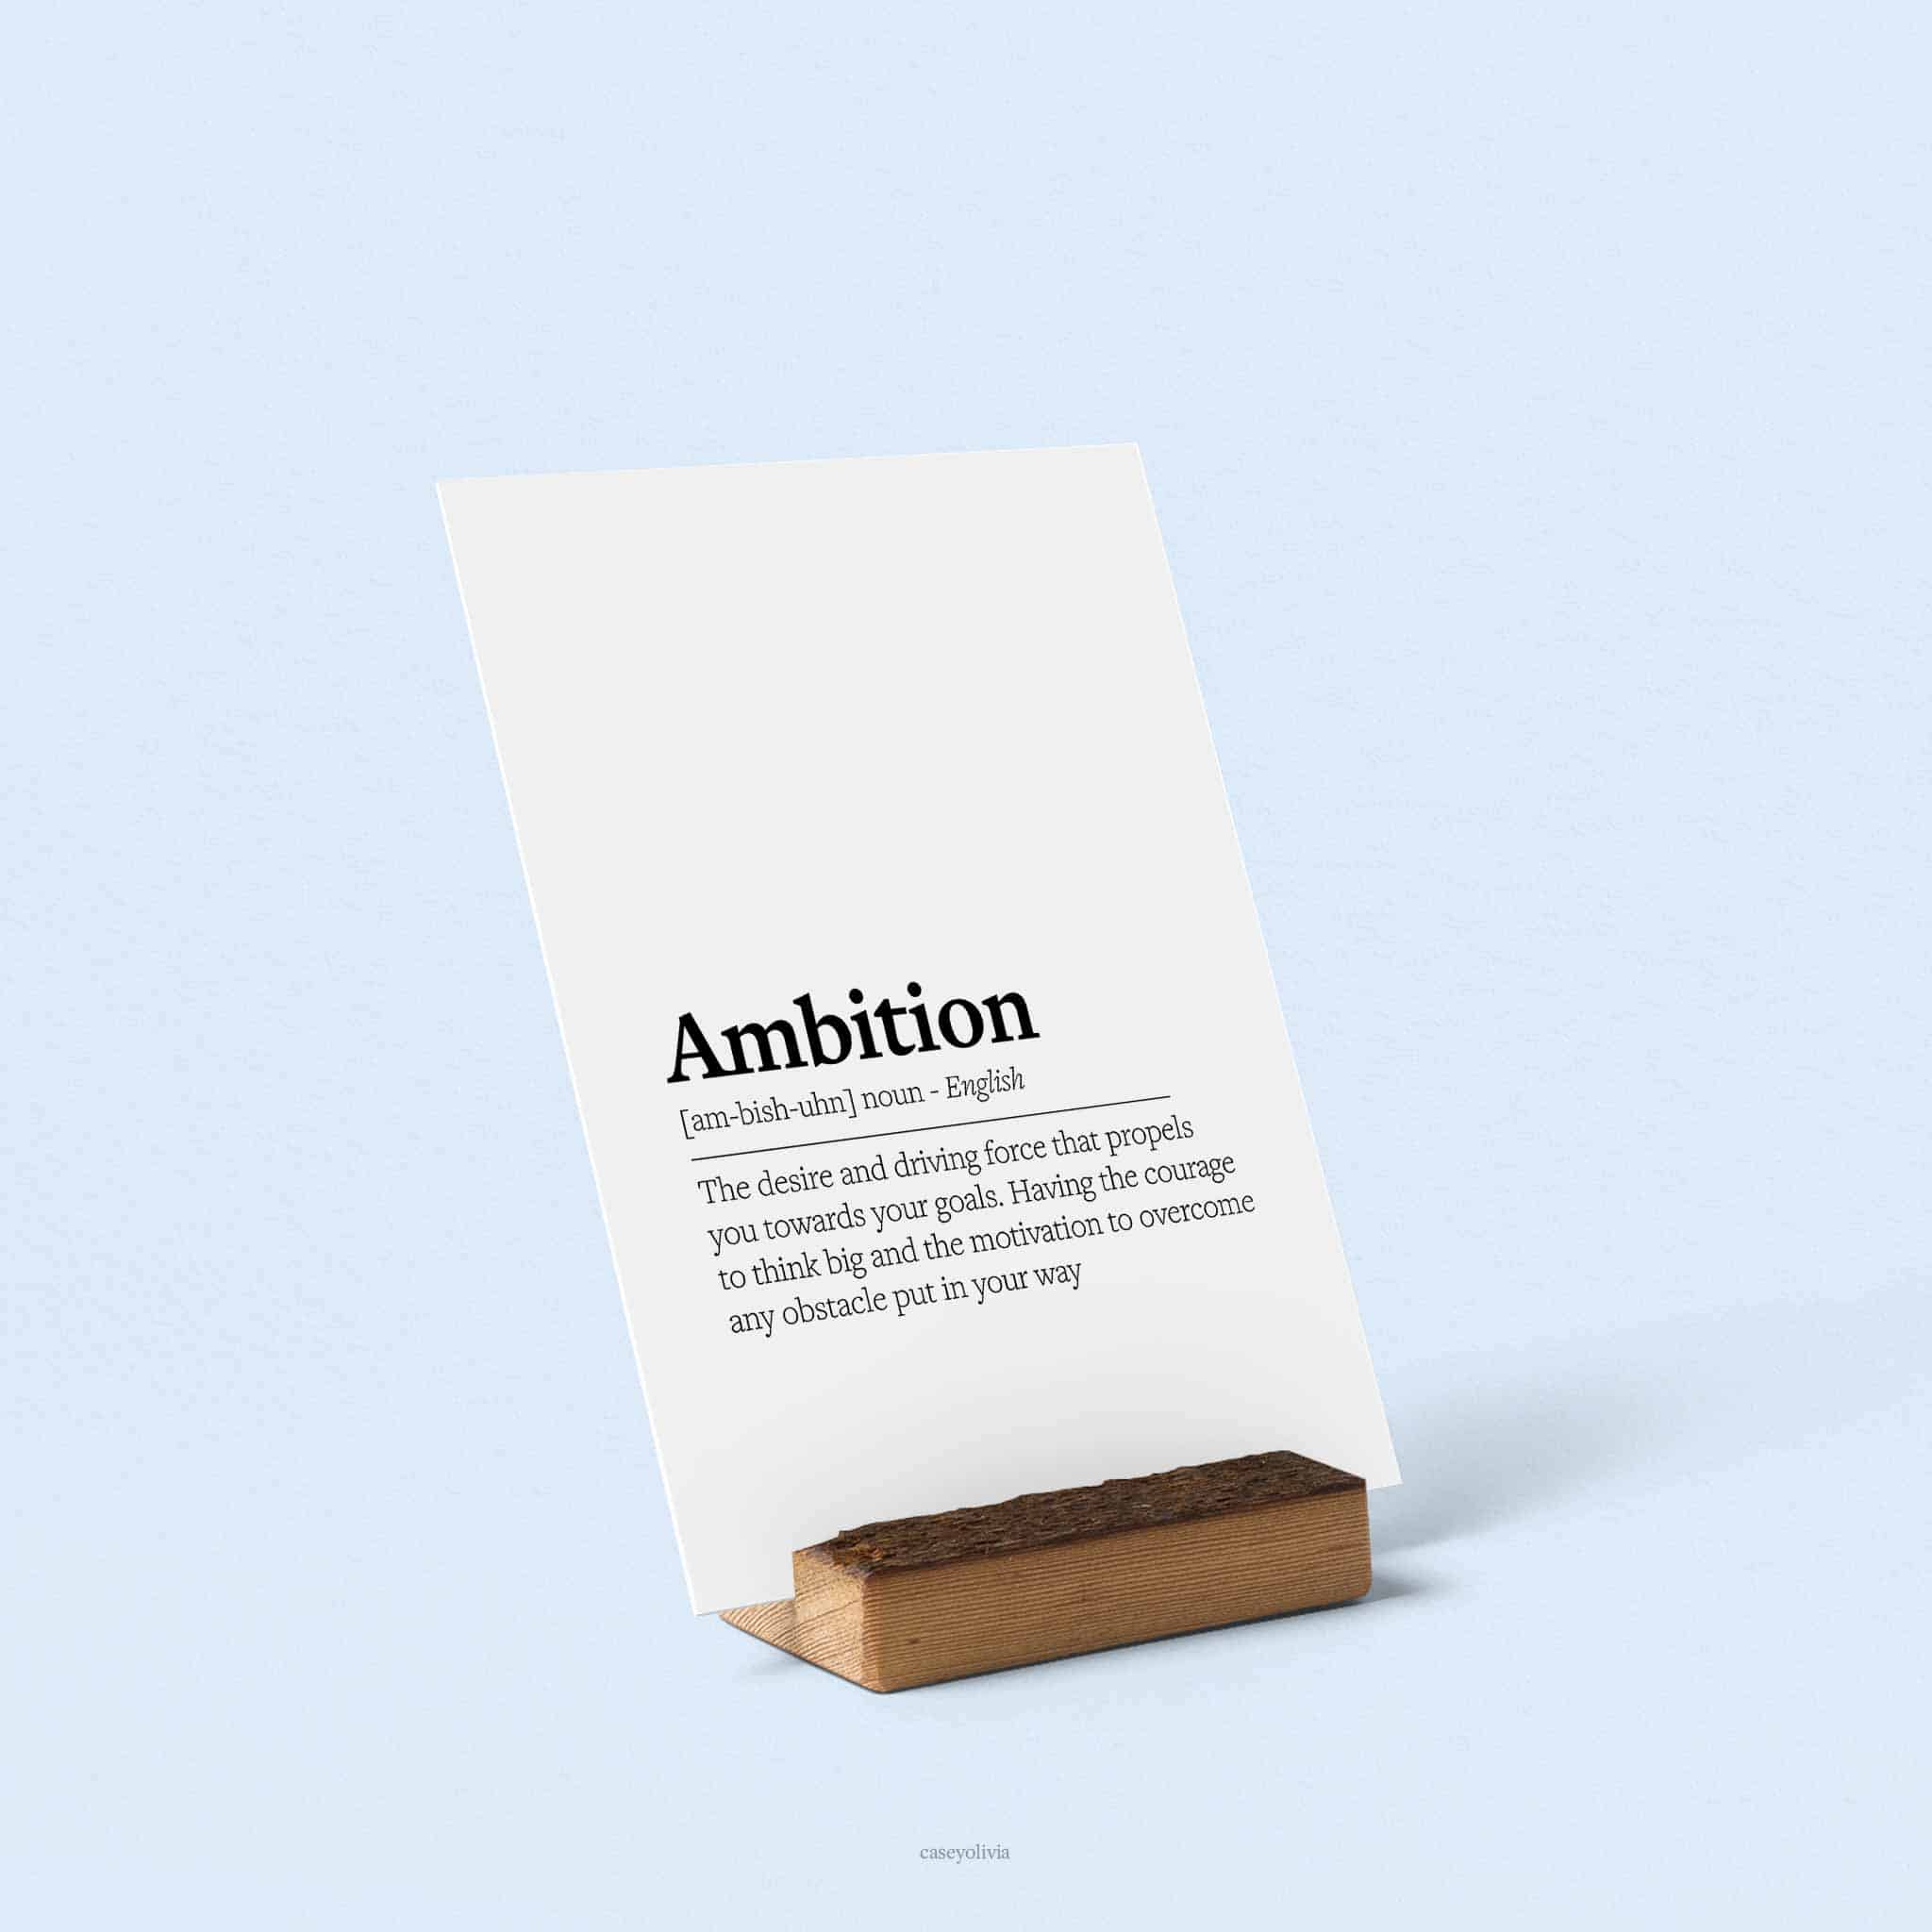 ambition printable quote for office or desk